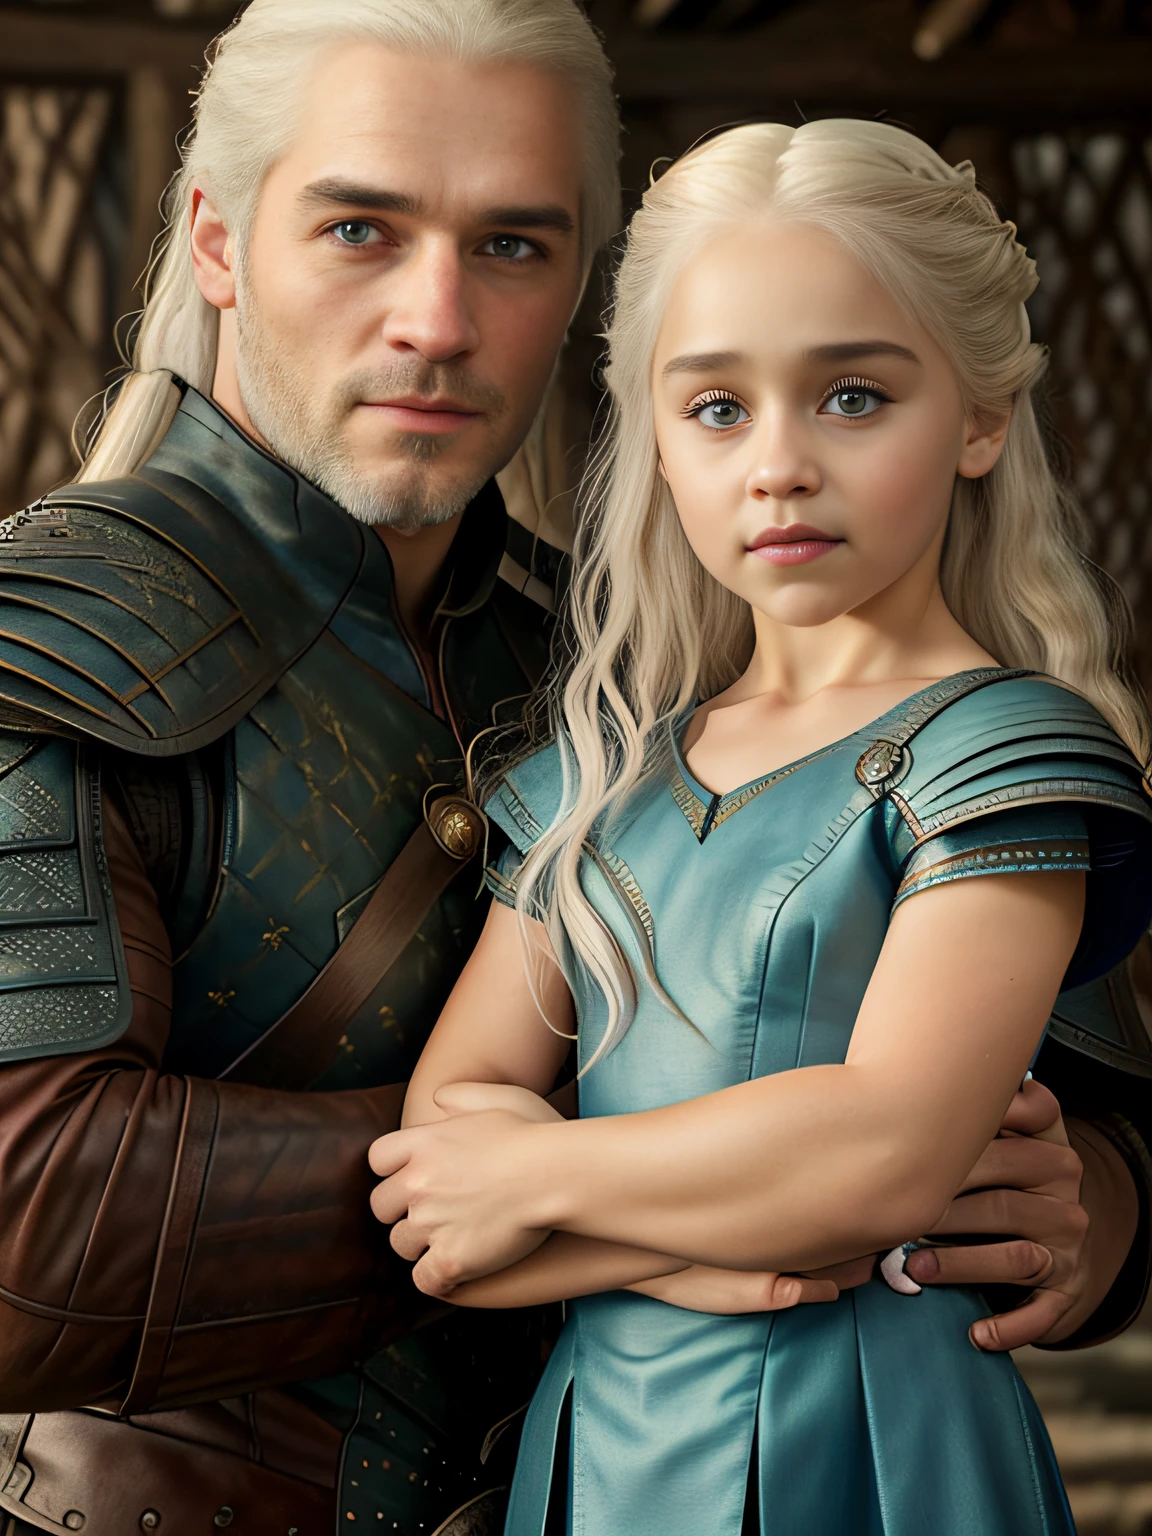 raw fullbody ((family photo of a father and mother holding their daughter)), 1girl, [daenerys targaryen|Emilia Clarke], (1man, Henry Cavill as Geralt de Rivia The Witcher), playing with their ((5 year old daughter)))), medieval clothing,((half body shot)), realistic proportions, realistic pupils, ((3 member family portrait)) limited palette, highres, cinematic lighting, 8k resolution, front lit, sunrise, RAW photo, Nikon 85mm, Award Winning, Glamour Photograph, extremely detailed, beautiful Ukrainian, mind-bending, Noth-Yidik, raw fullbody photo of Daenerys Targaryen and Geralt de Rivia The Witcher with 5 year old daughter, highly detailed, artstation, smooth, sharp focus, 8K,, trending on instagram, trending on tumblr, hdr 4k, 8k